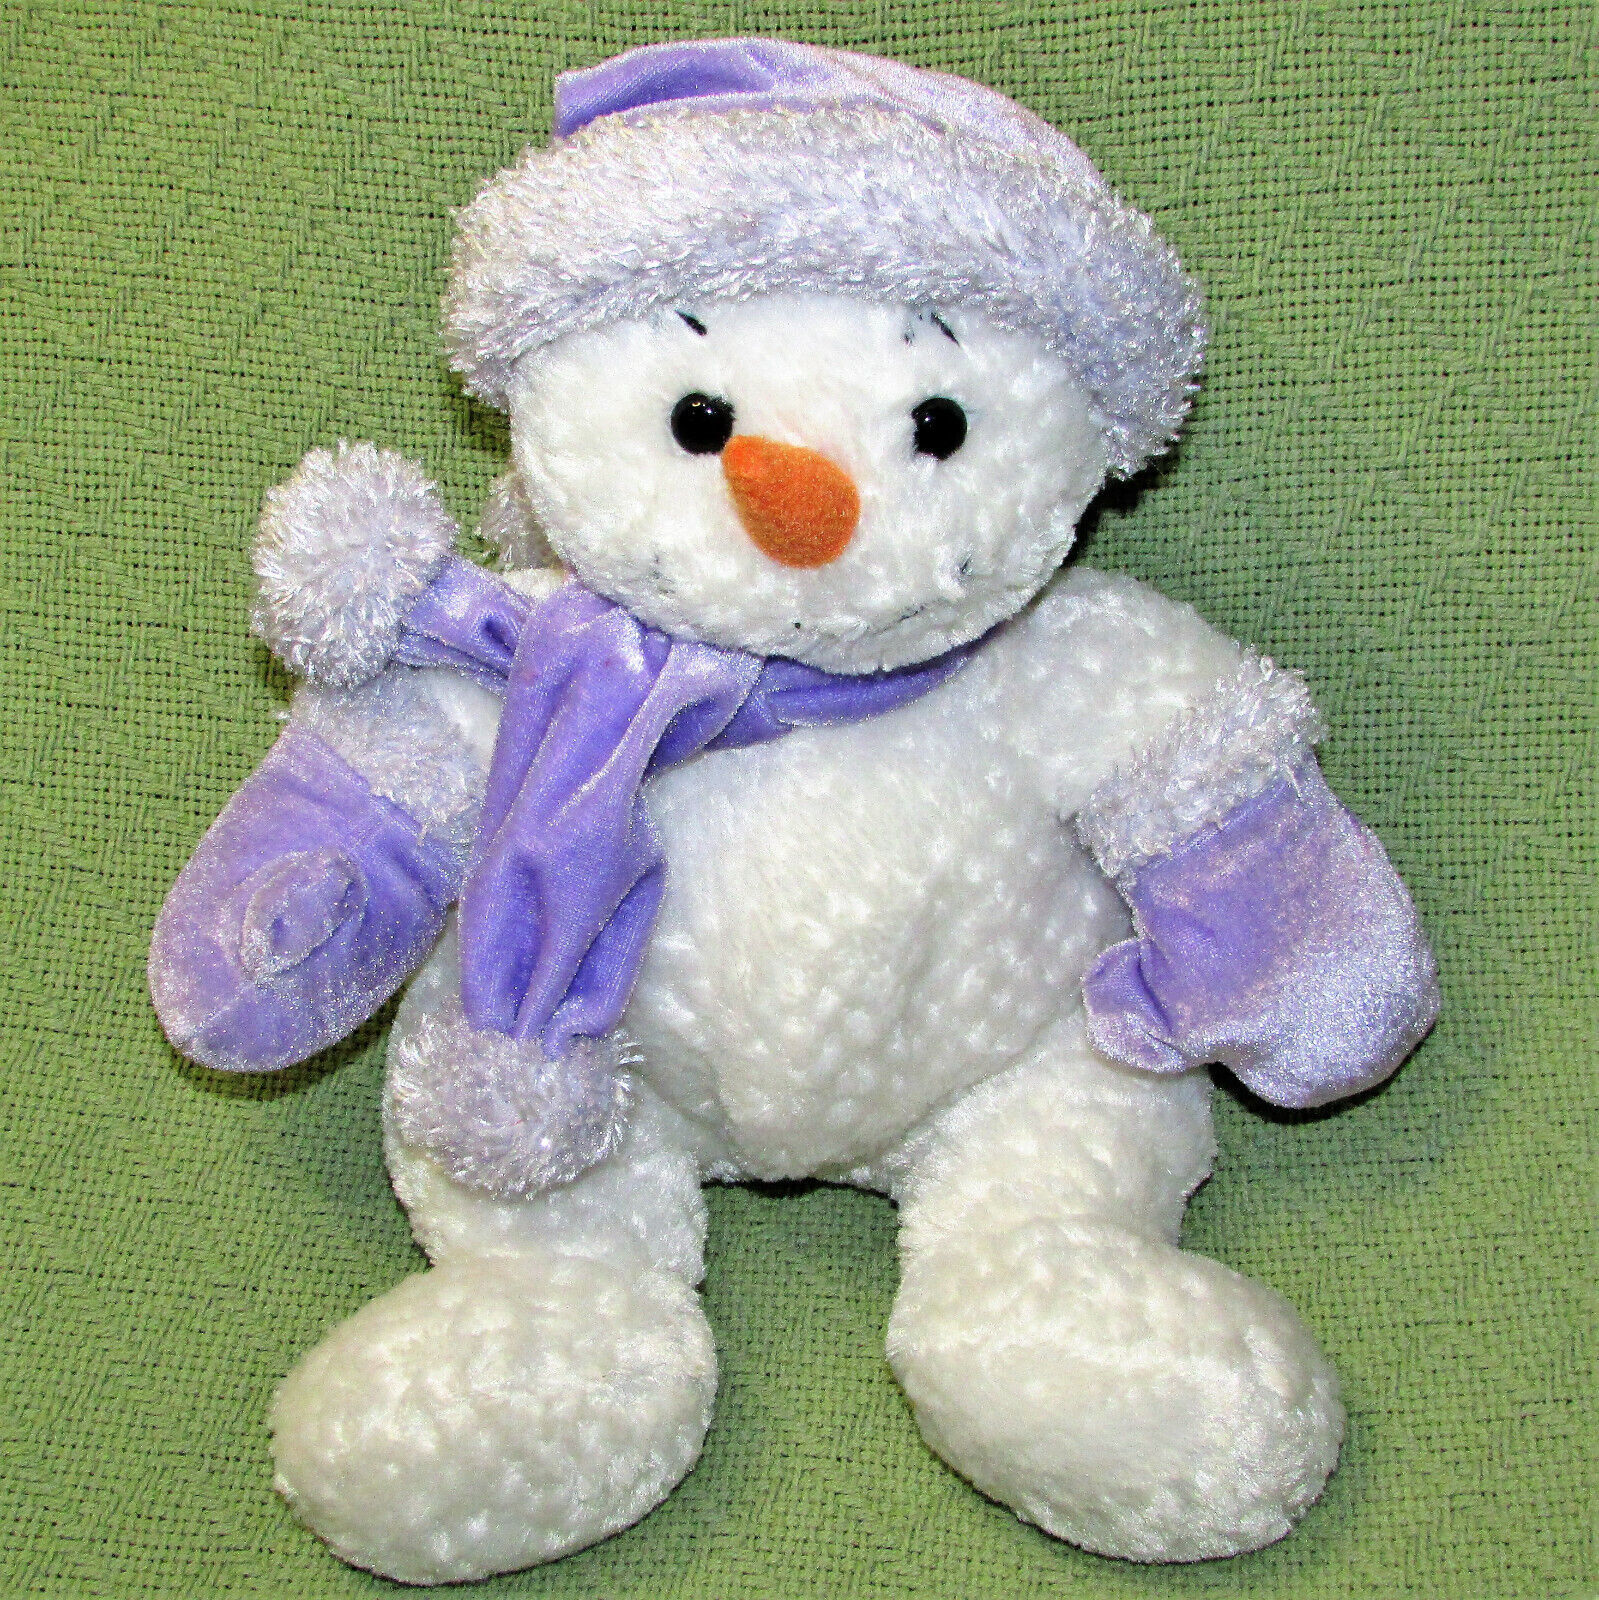 COMMONWEALTH SNOWMAN 12" STUFFED ANIMAL 2003 WHITE SPARKLY PURPLE HAT MITTS TOY - $27.00